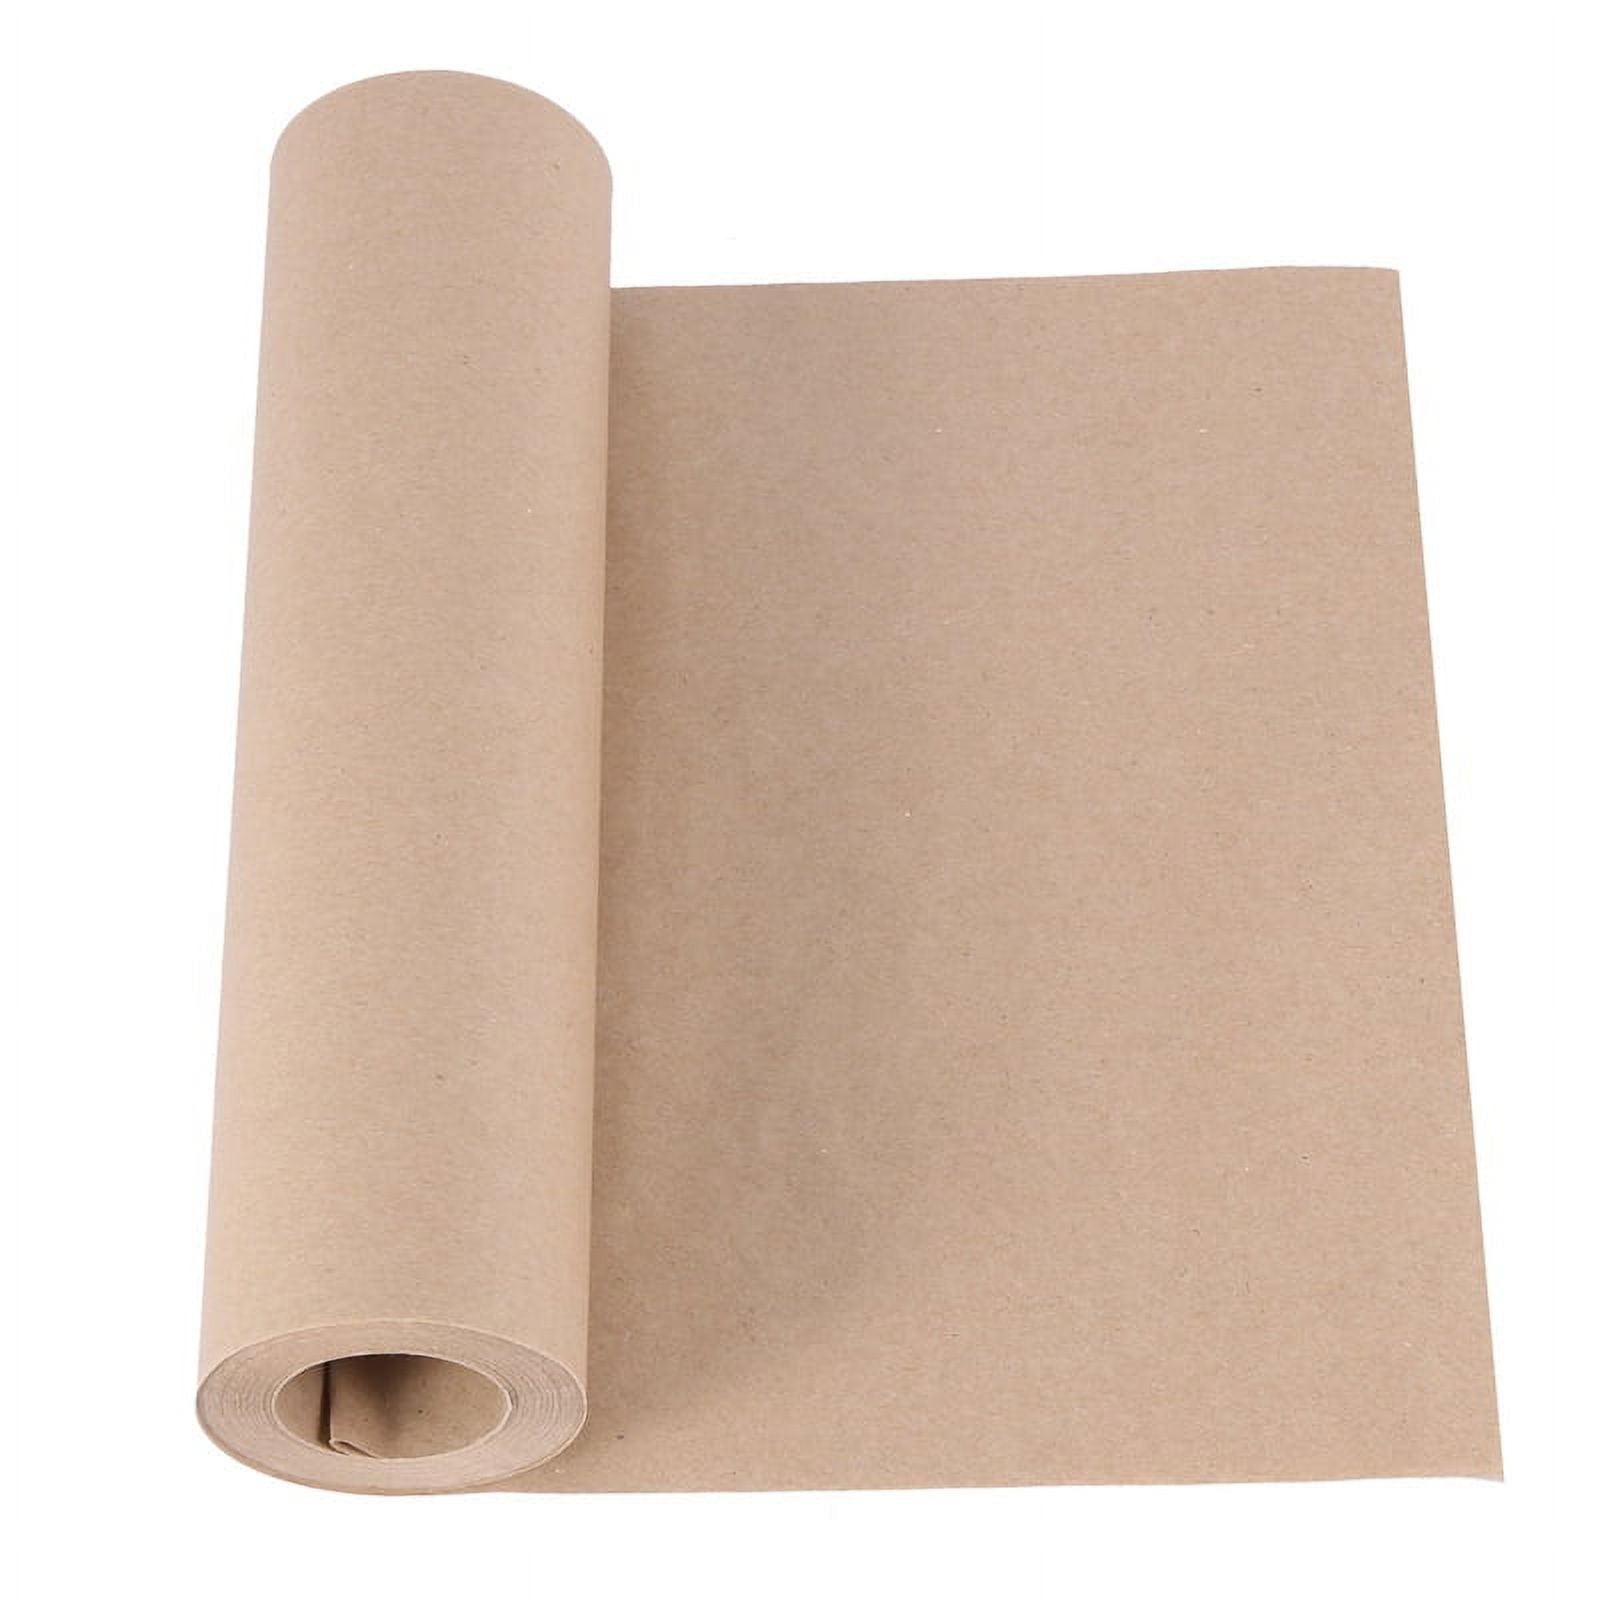 Brown Kraft Paper Roll, Brown Craft Paper Roll For Table Covering, Brown  Wrapping Paper Roll For